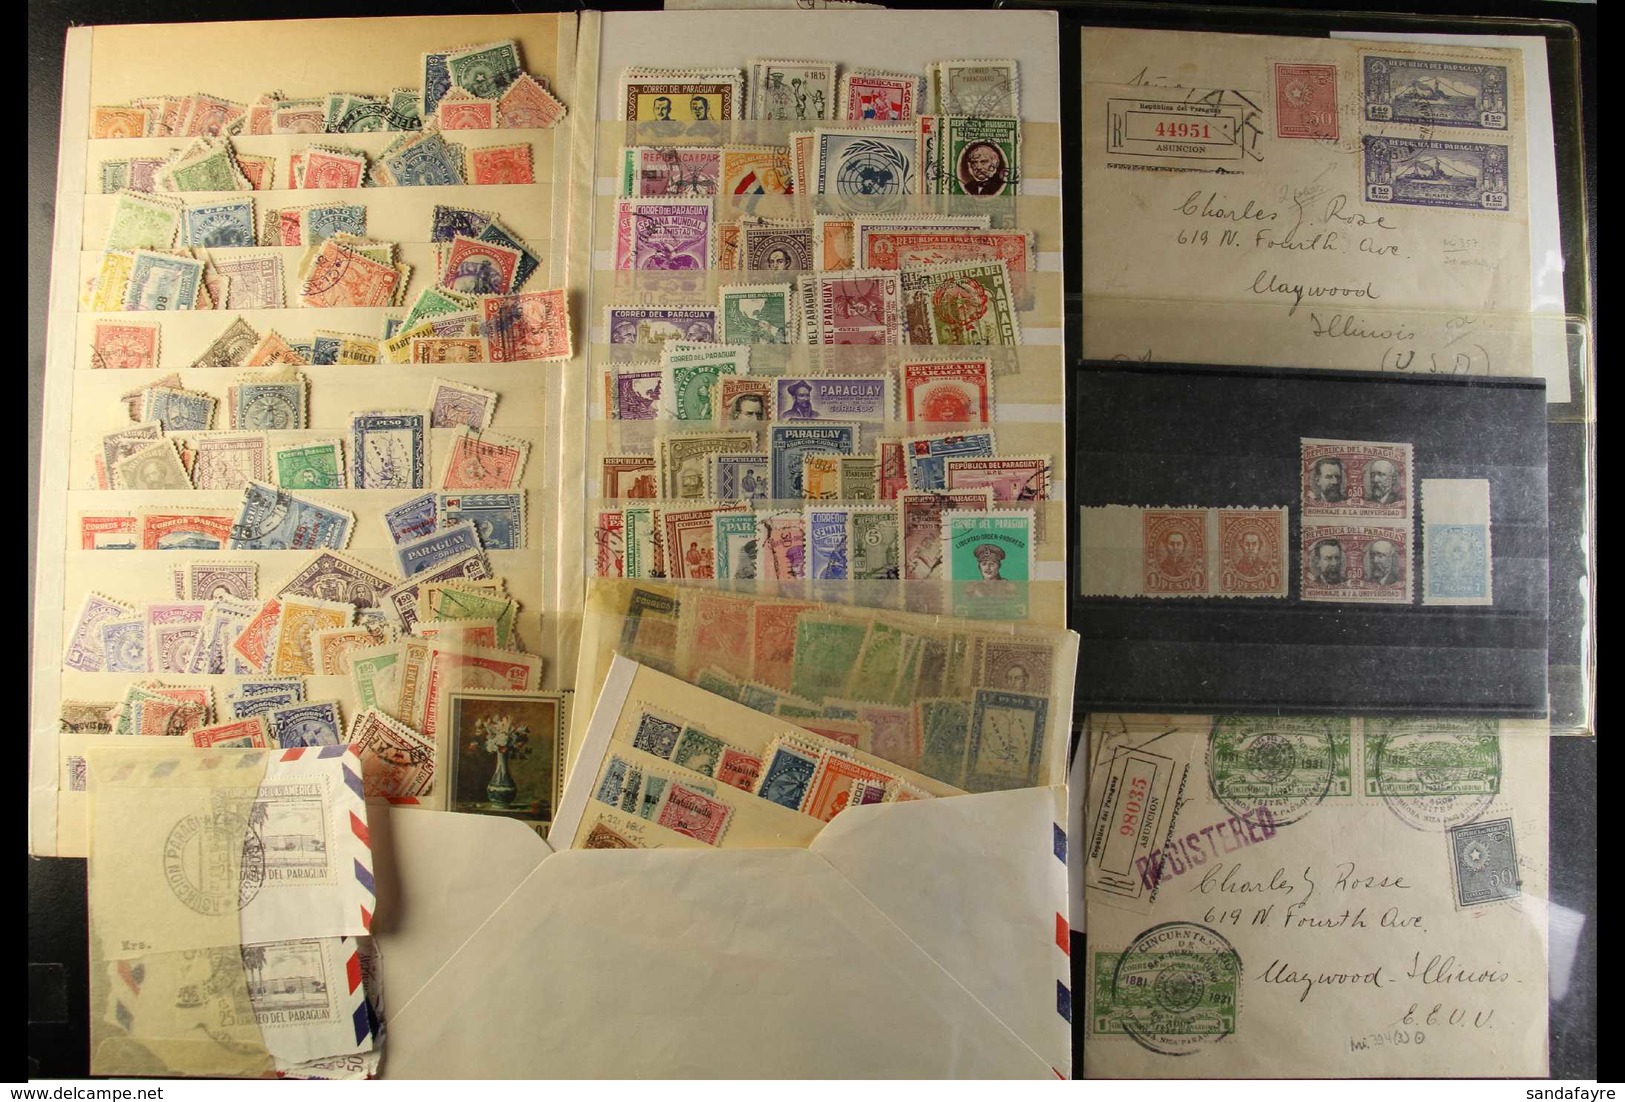 SMORGASBORD LOT! A Small Assortment Of 19th Century To 1950's Stamps, Covers, Proofs, And Other Items Of Interest Stuffe - Paraguay